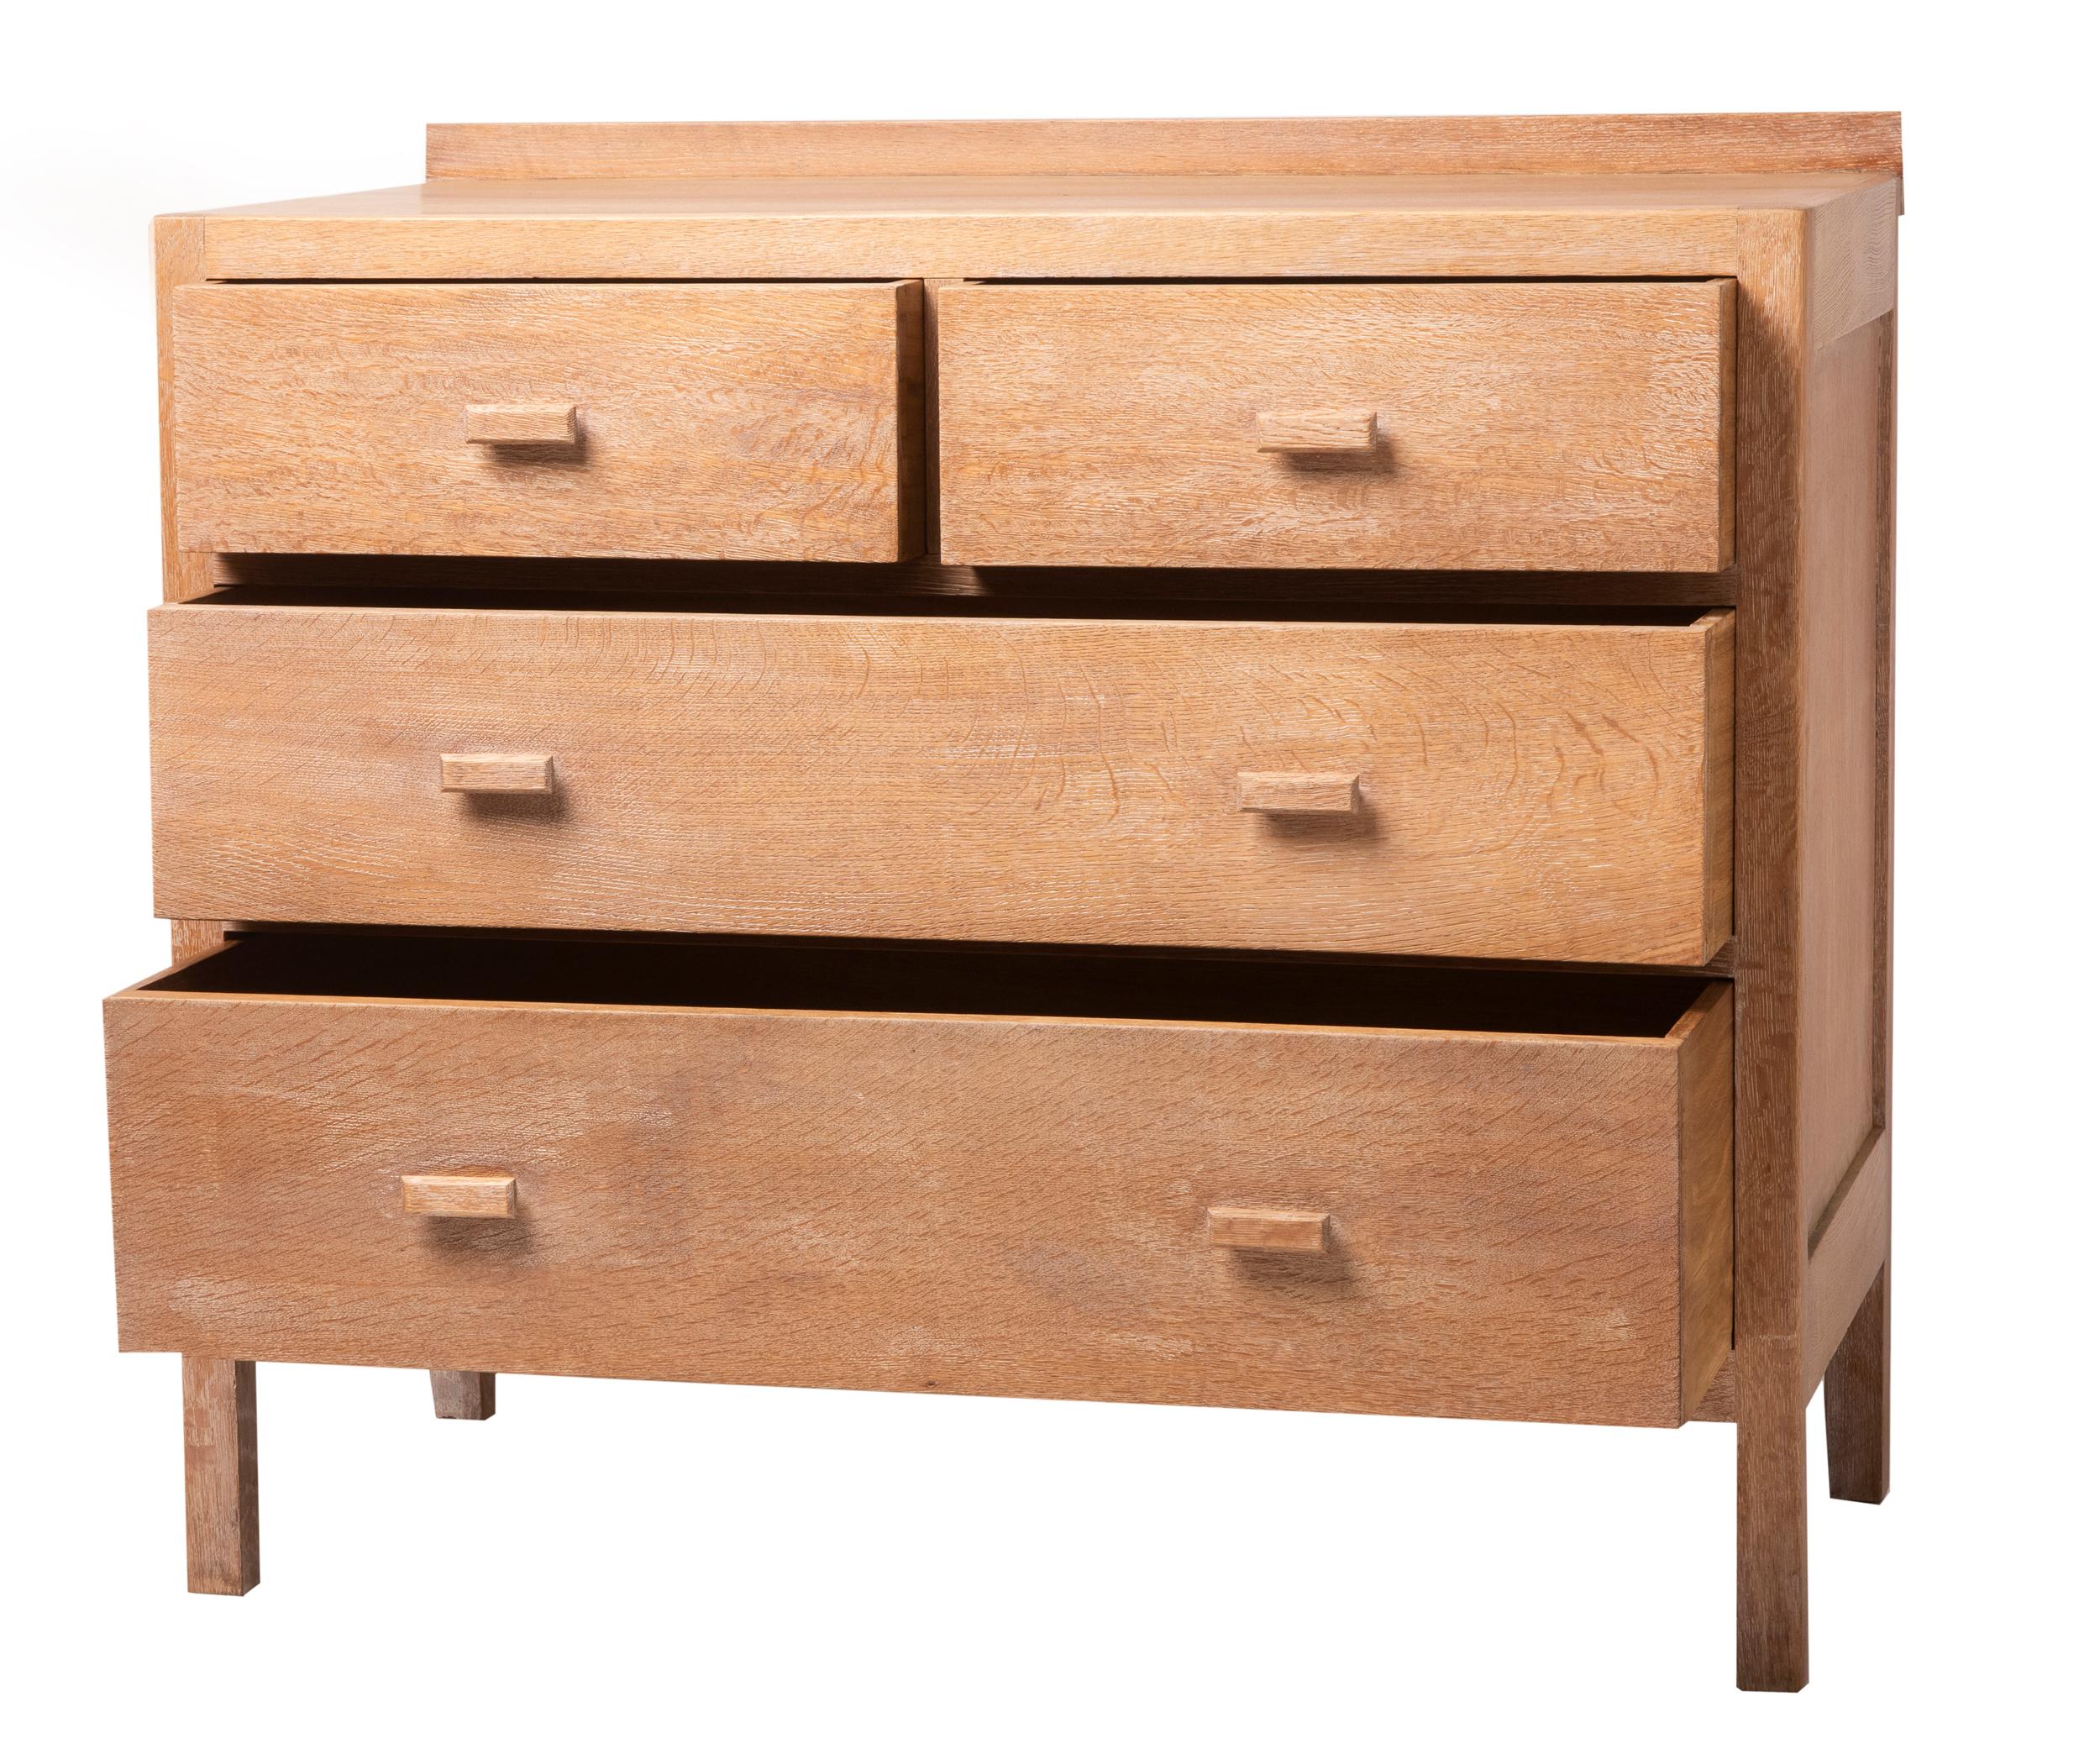 Limed Oak Chest of Drawers by Heals, England, circa 1930 In Good Condition For Sale In Macclesfield, Cheshire